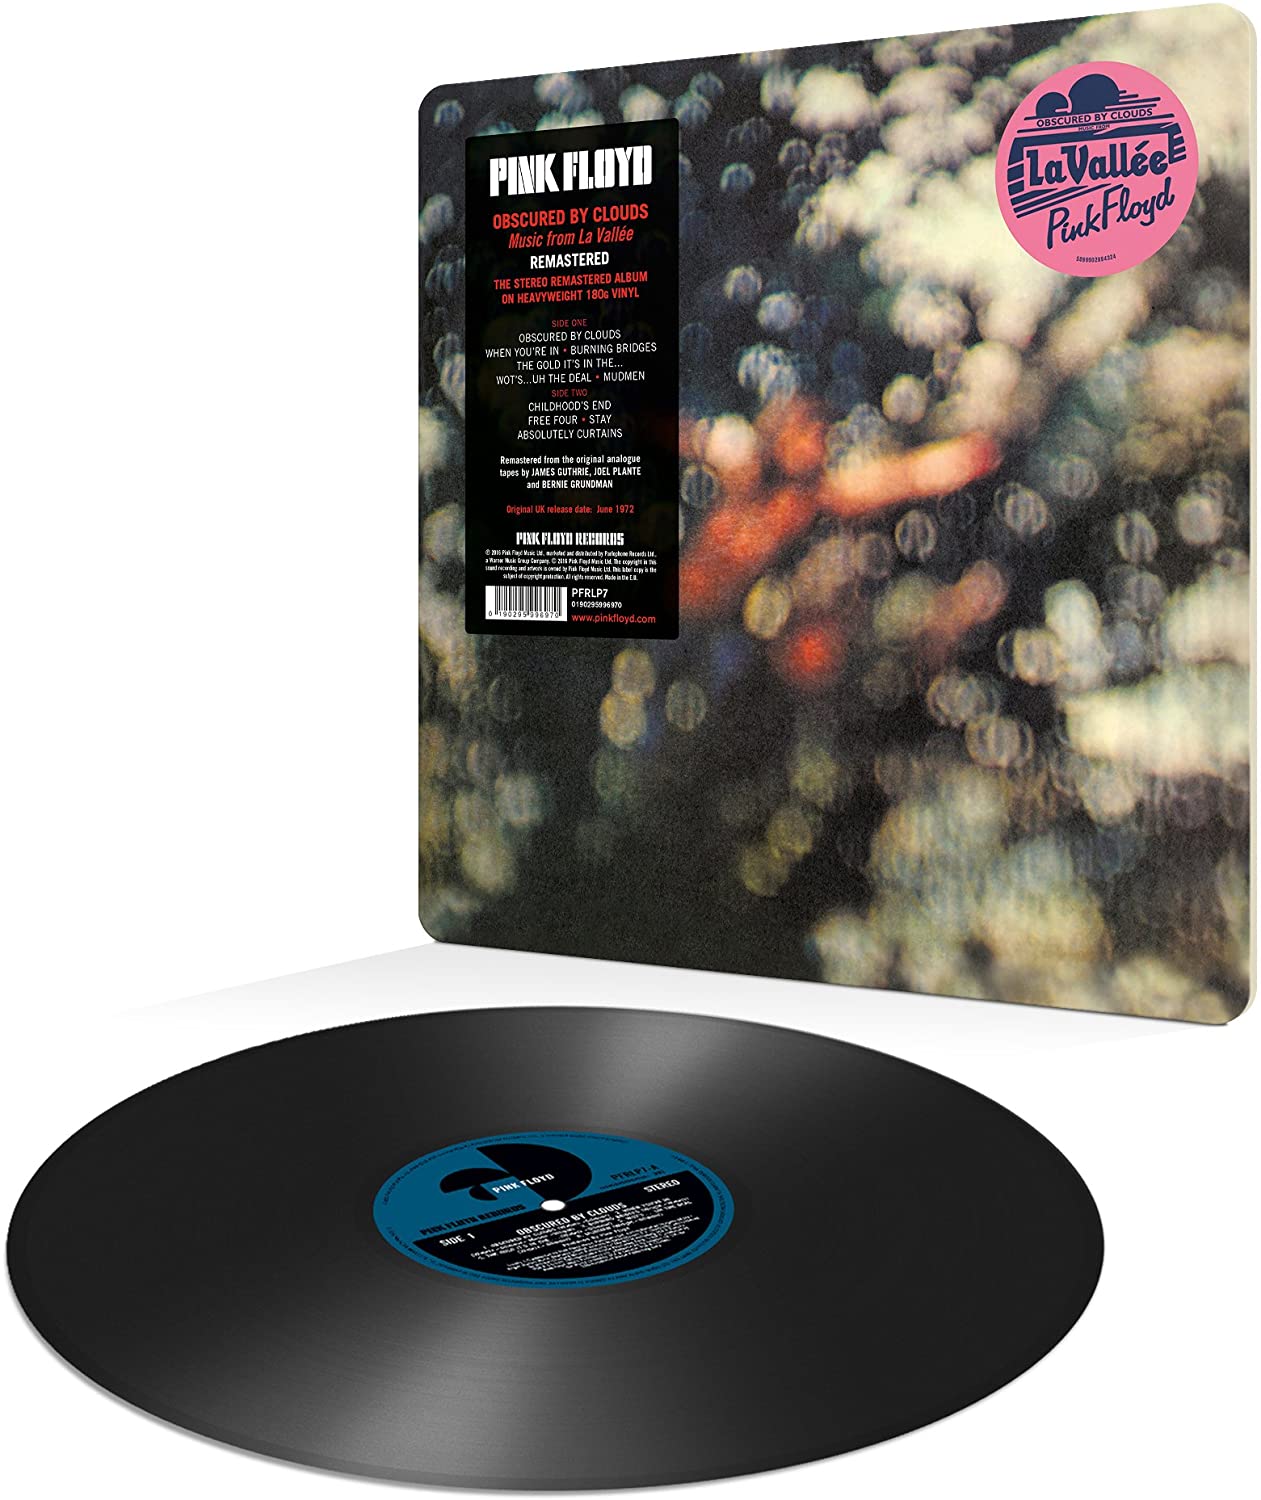 Pink Floyd Obscured By Clouds - Ireland Vinyl